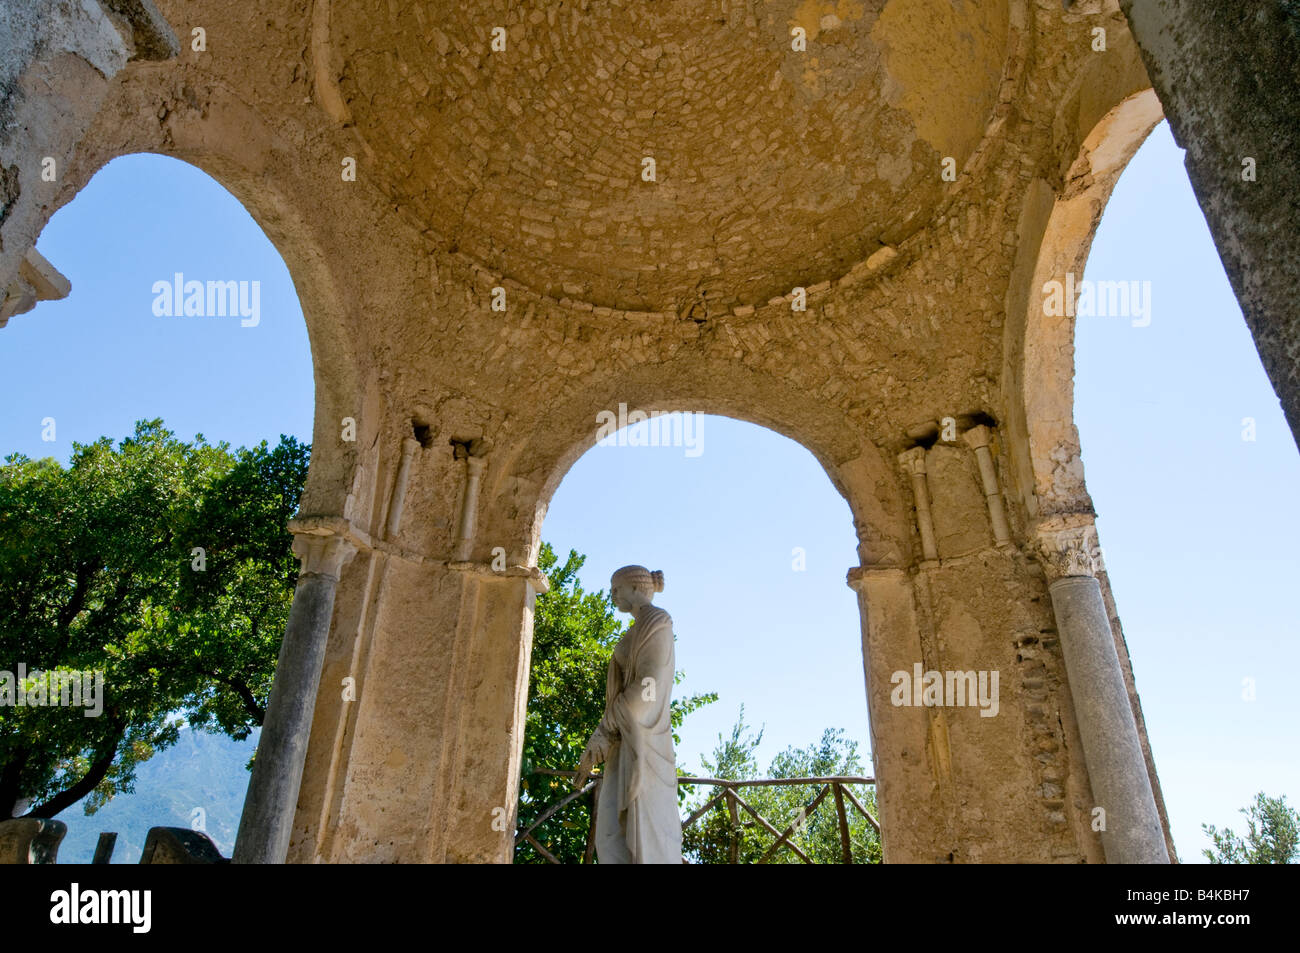 Temple of Ceres in the gardens at Villa Cimbrone, Ravello, Italy Stock Photo